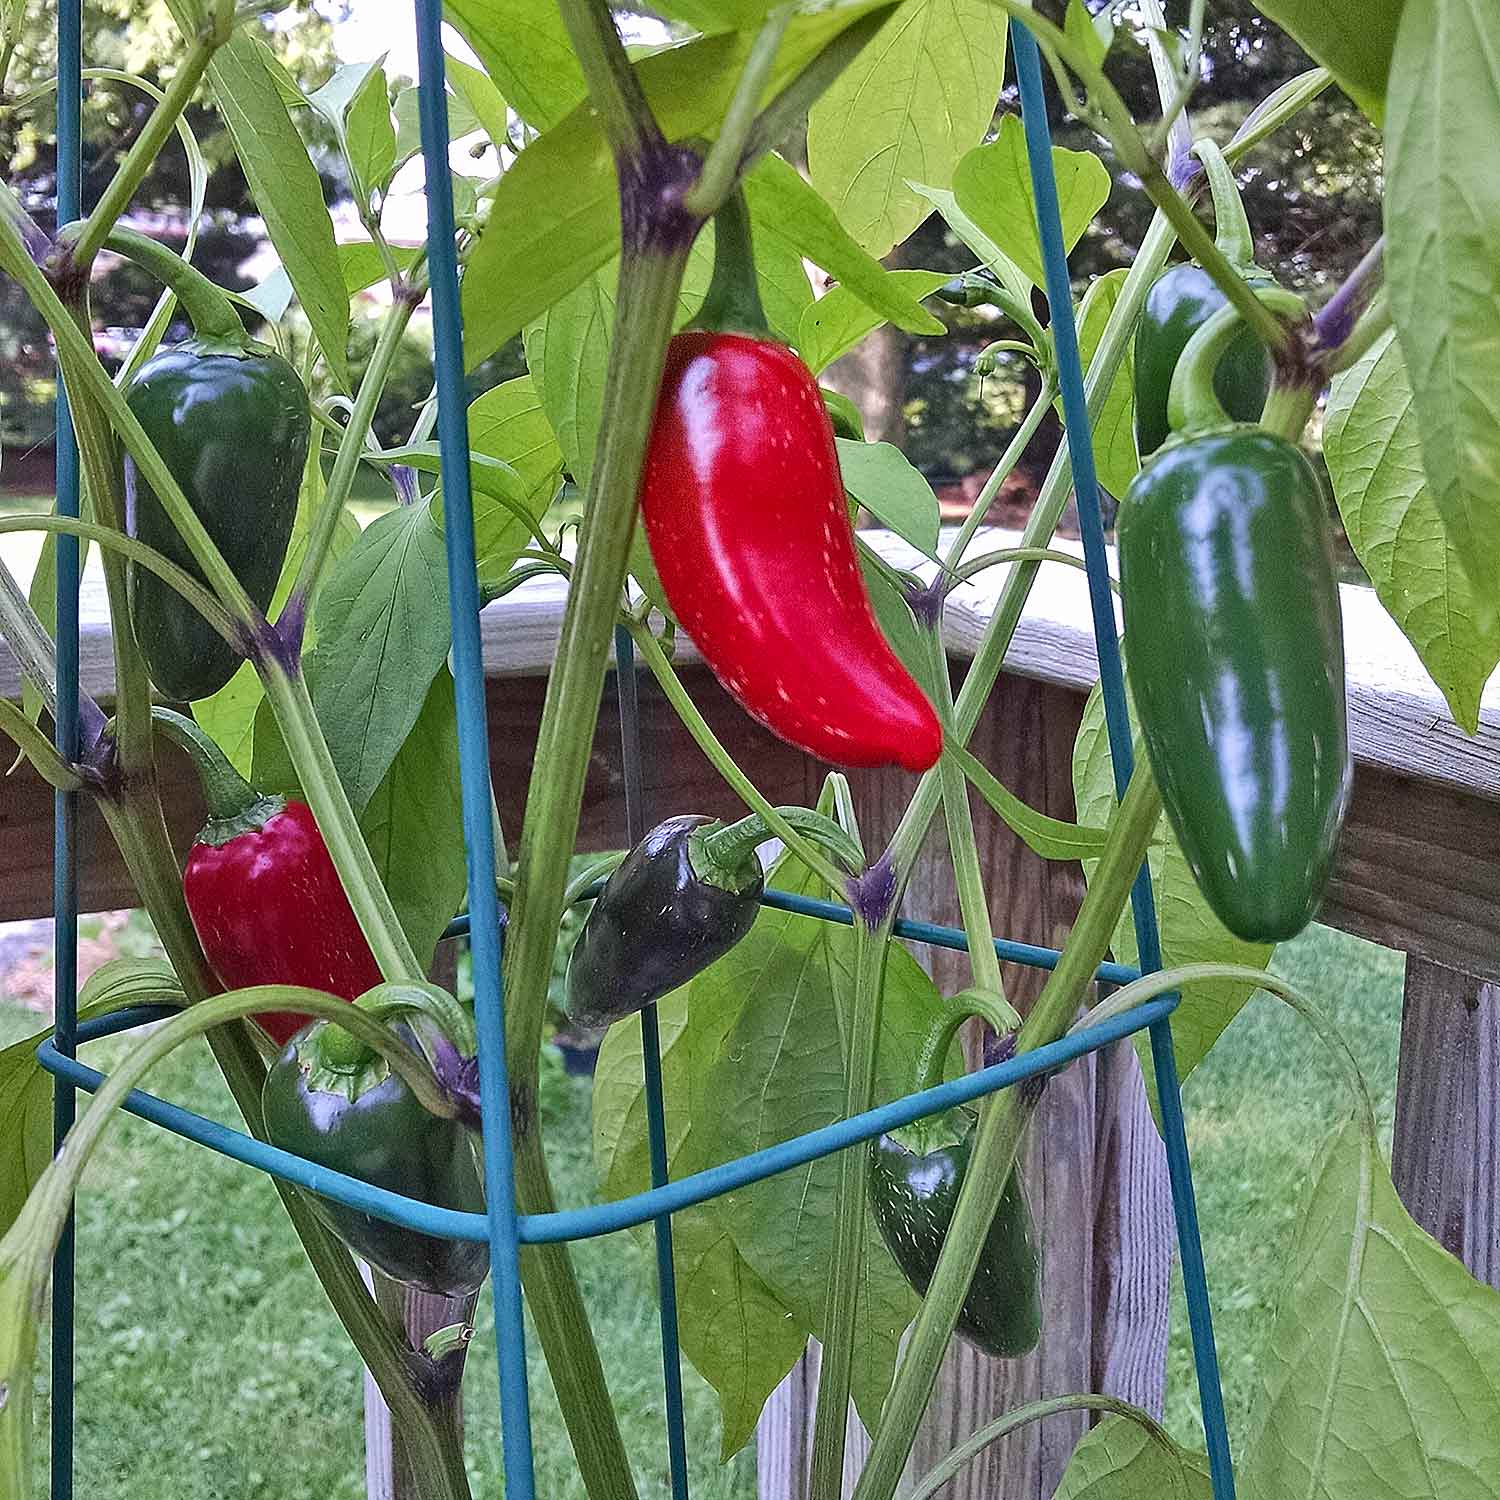 Red and green jalapeno peppers on the plant.